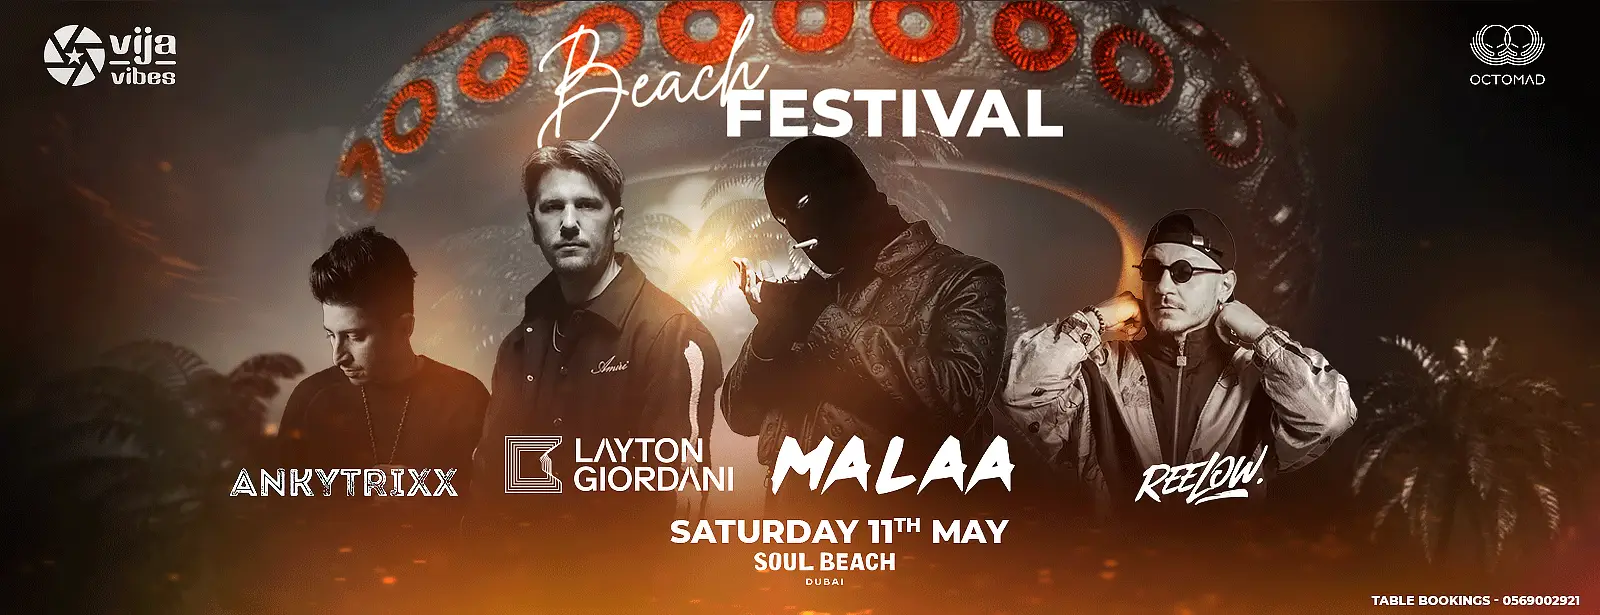 Beach Festival by Octomad and Vija Vibes at Soul Beach || Wow-Emirates